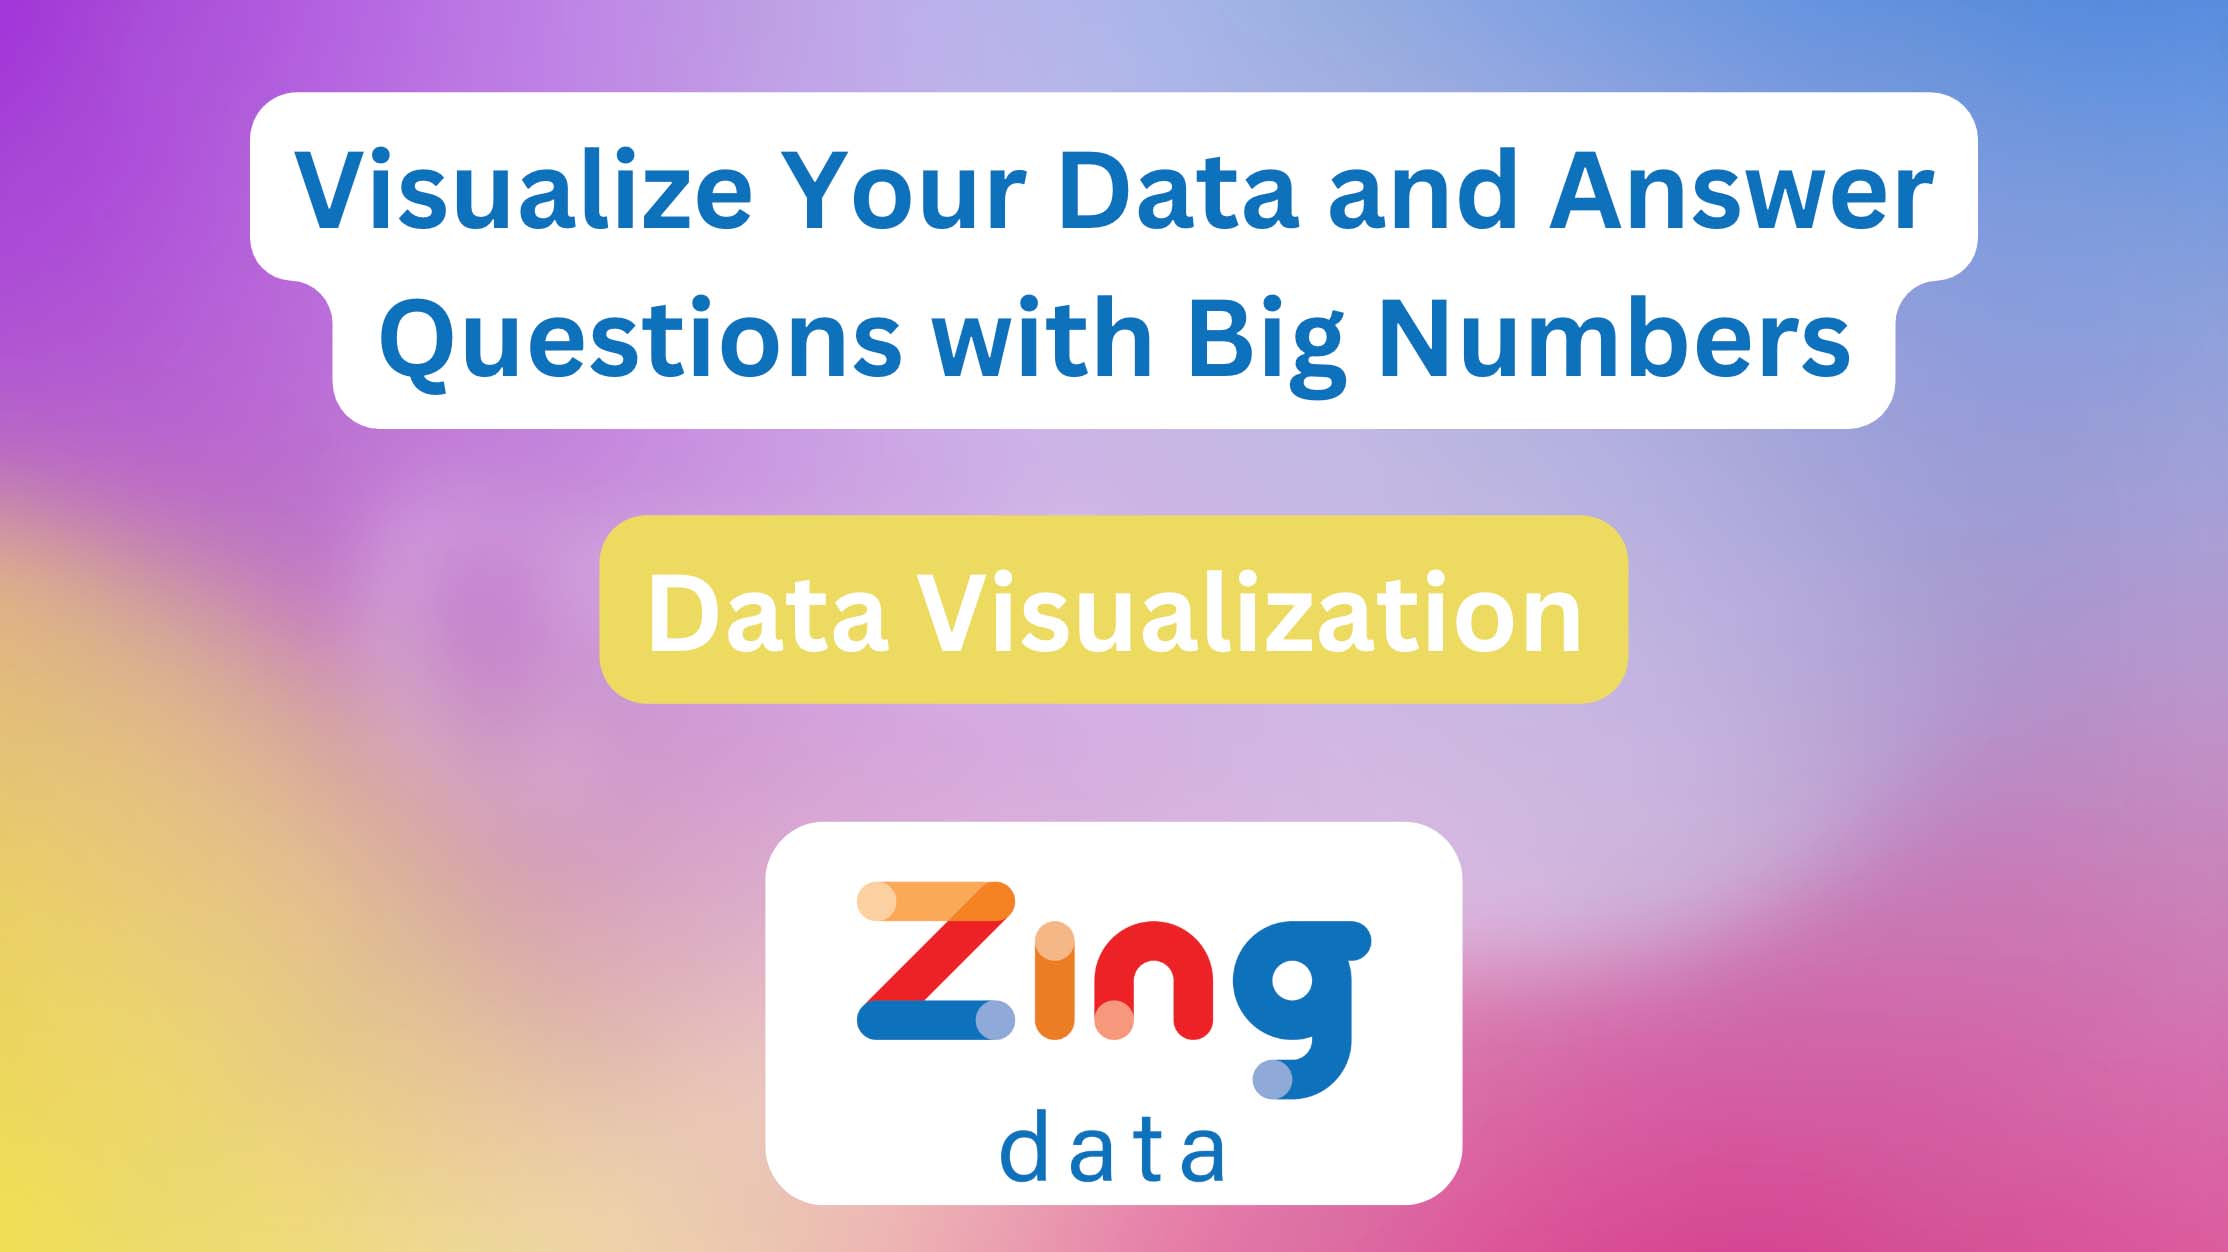 Data Visualization with Big Numbers